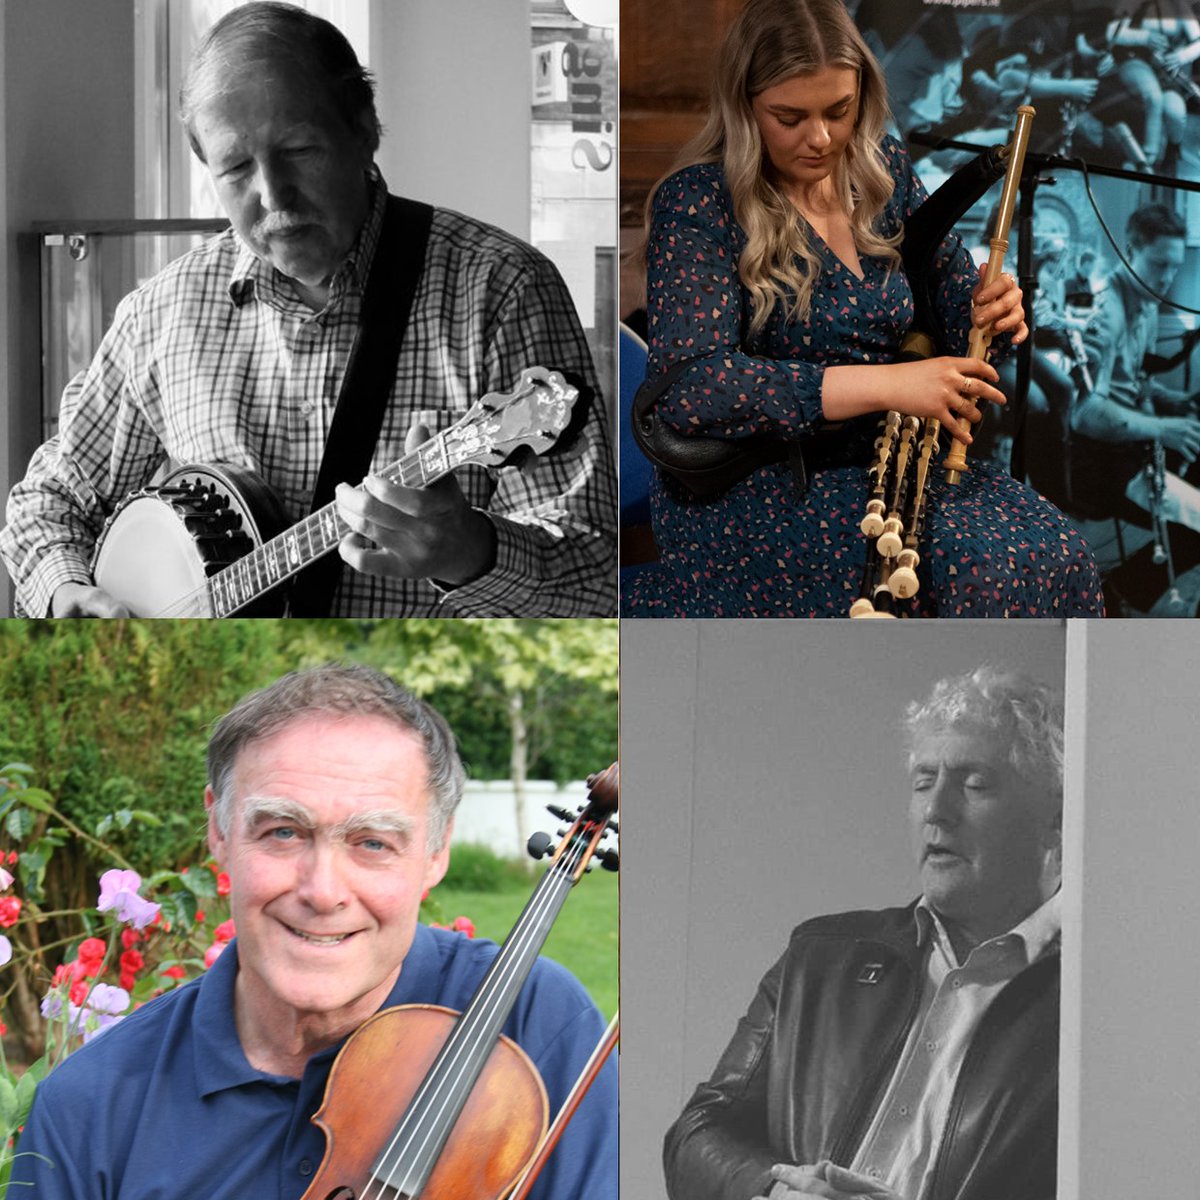 We'll be in @CobblestoneDub tonight with #SessionWithThePipers, Tuesday 6th June with Maeve O'Donnell, Mick O'Connor, Antóin Mac Gabhann & Niall Wall!

Doors open 9pm. Tickets: loom.ly/gTdv6q4

#napiobairi #uilleann #sharingthesound #performance @artscouncil_ie